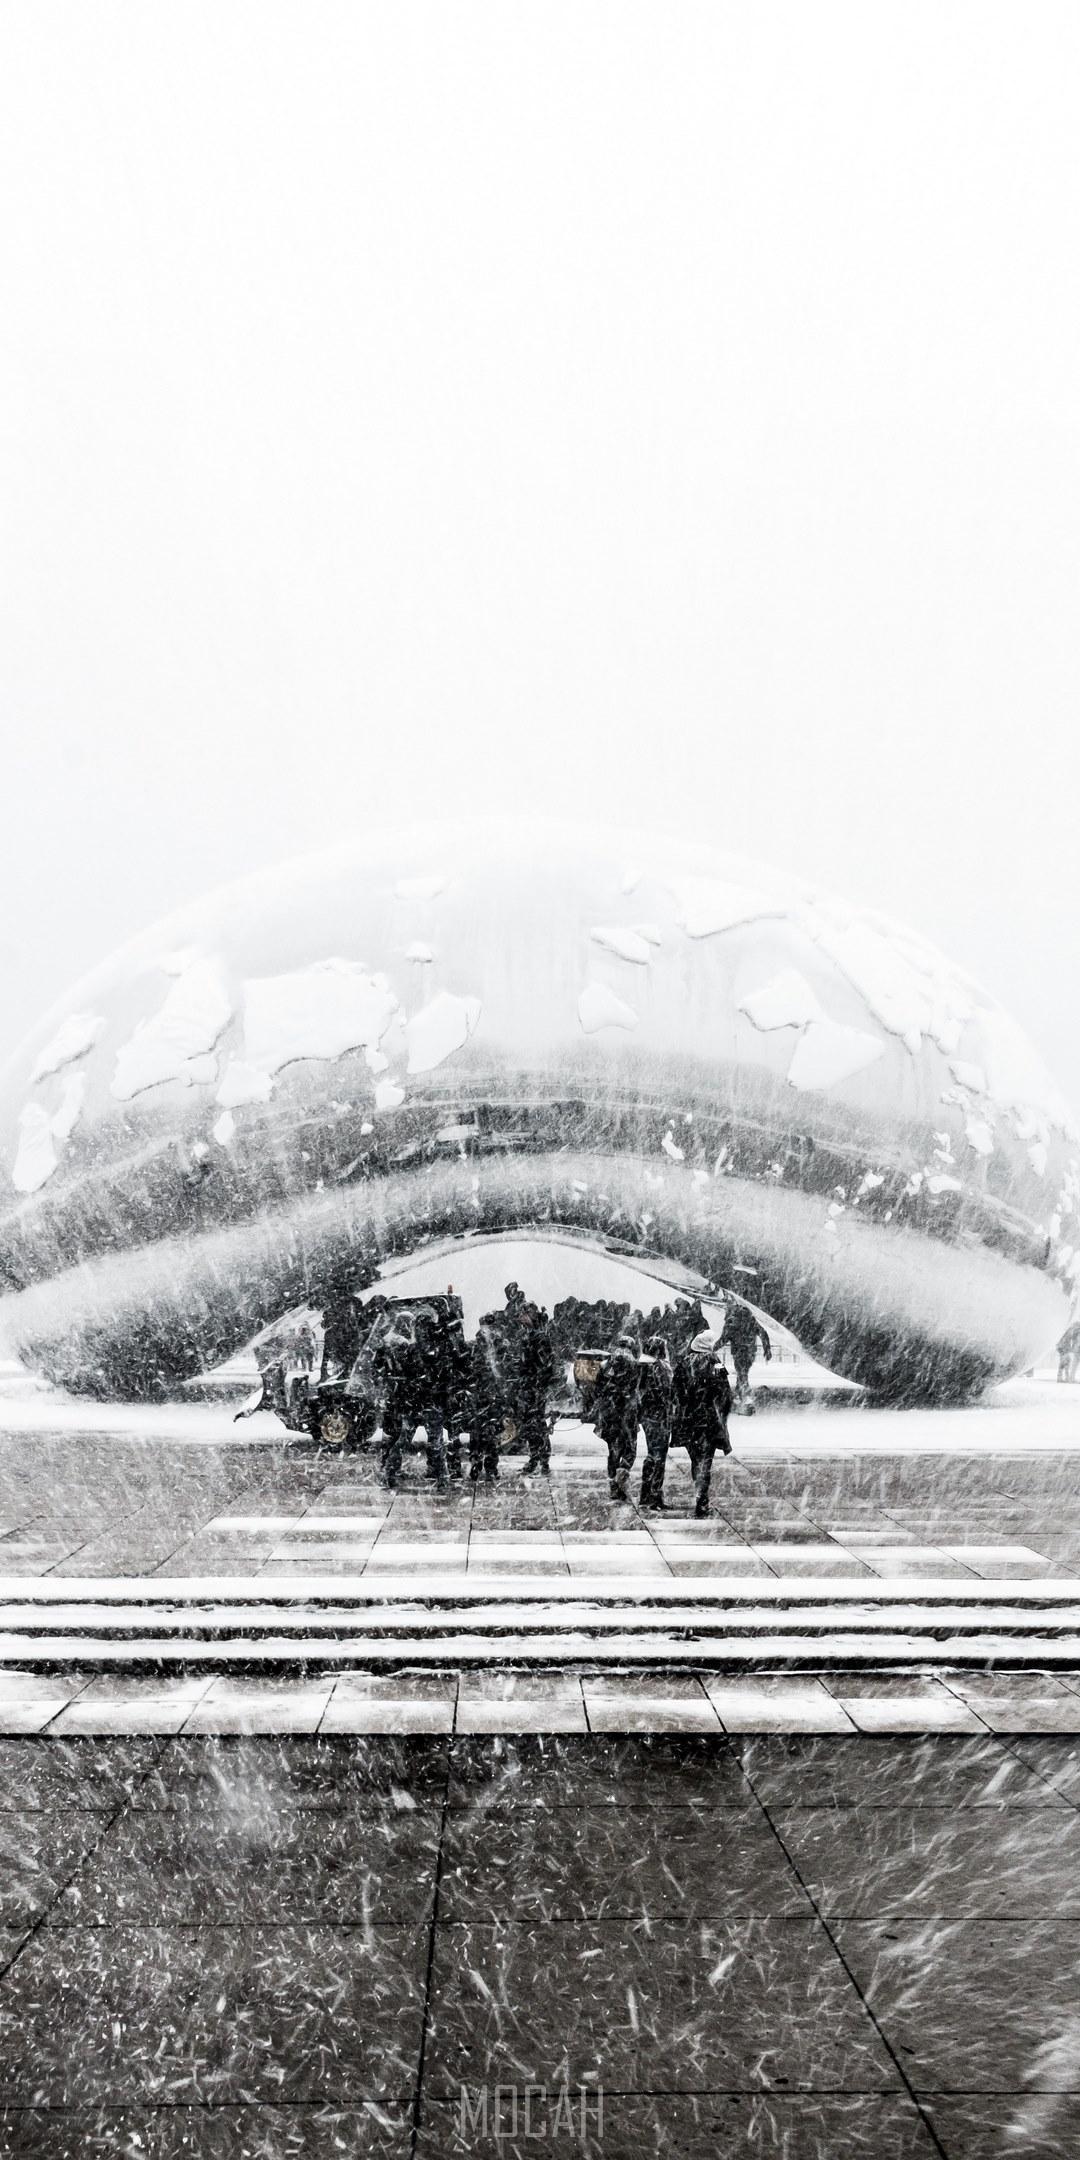 HD wallpaper, Infinix Note 6 Screensaver Hd, Black And White Shot Of Group Of People Standing Near Modern Sculpture In Heavy Snow Chicago, 1080X2160, The Bean Snowy In March